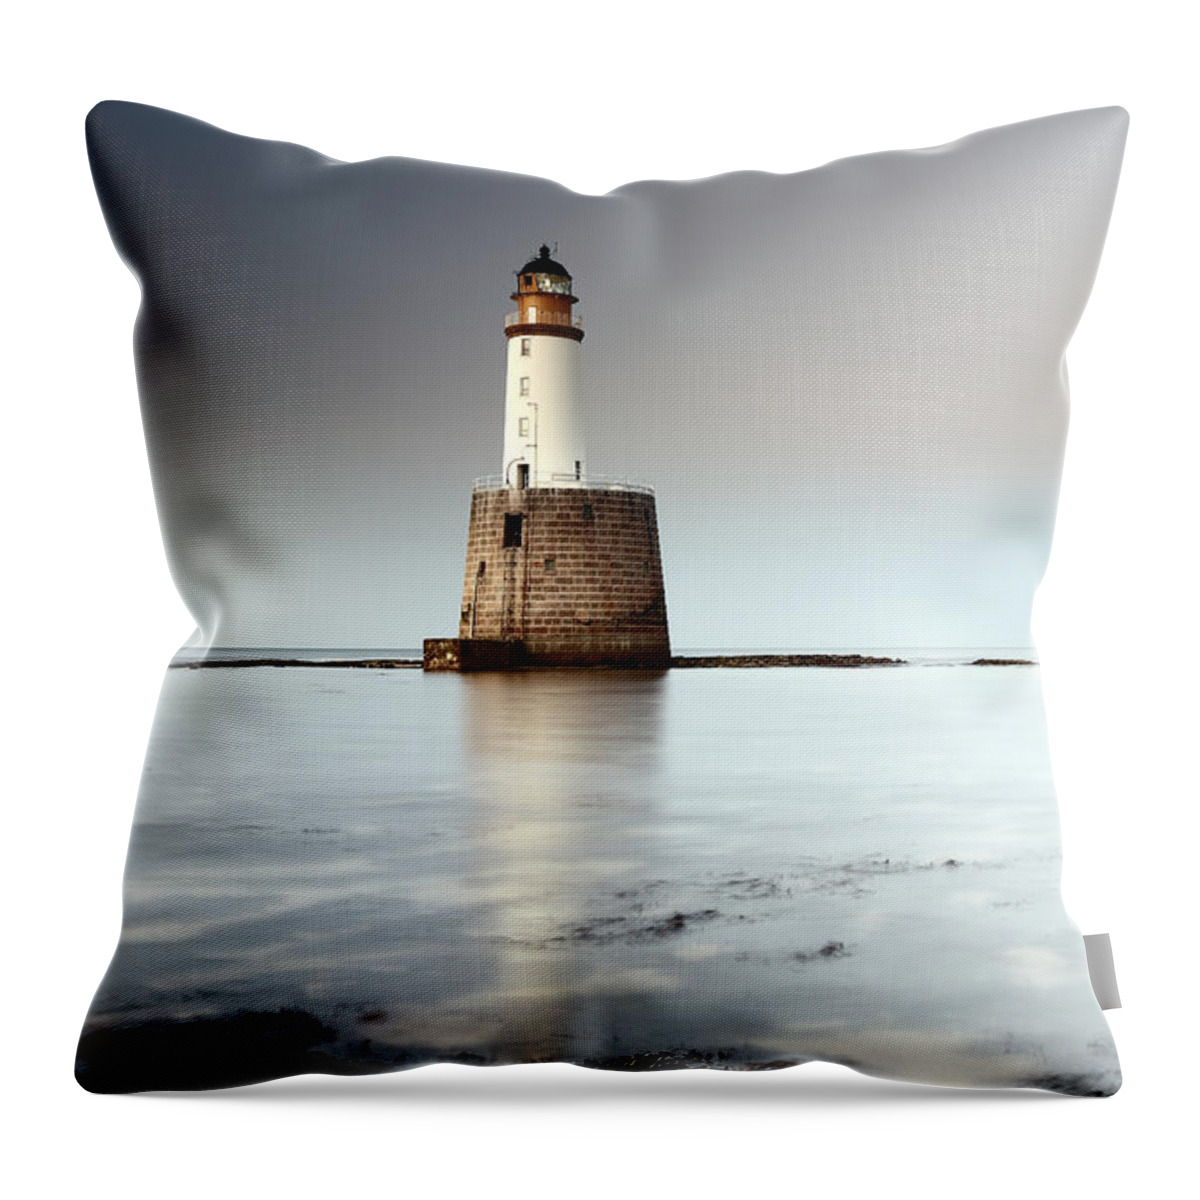 Lighthouse Throw Pillow featuring the photograph Rattray Head Lighthouse by Grant Glendinning